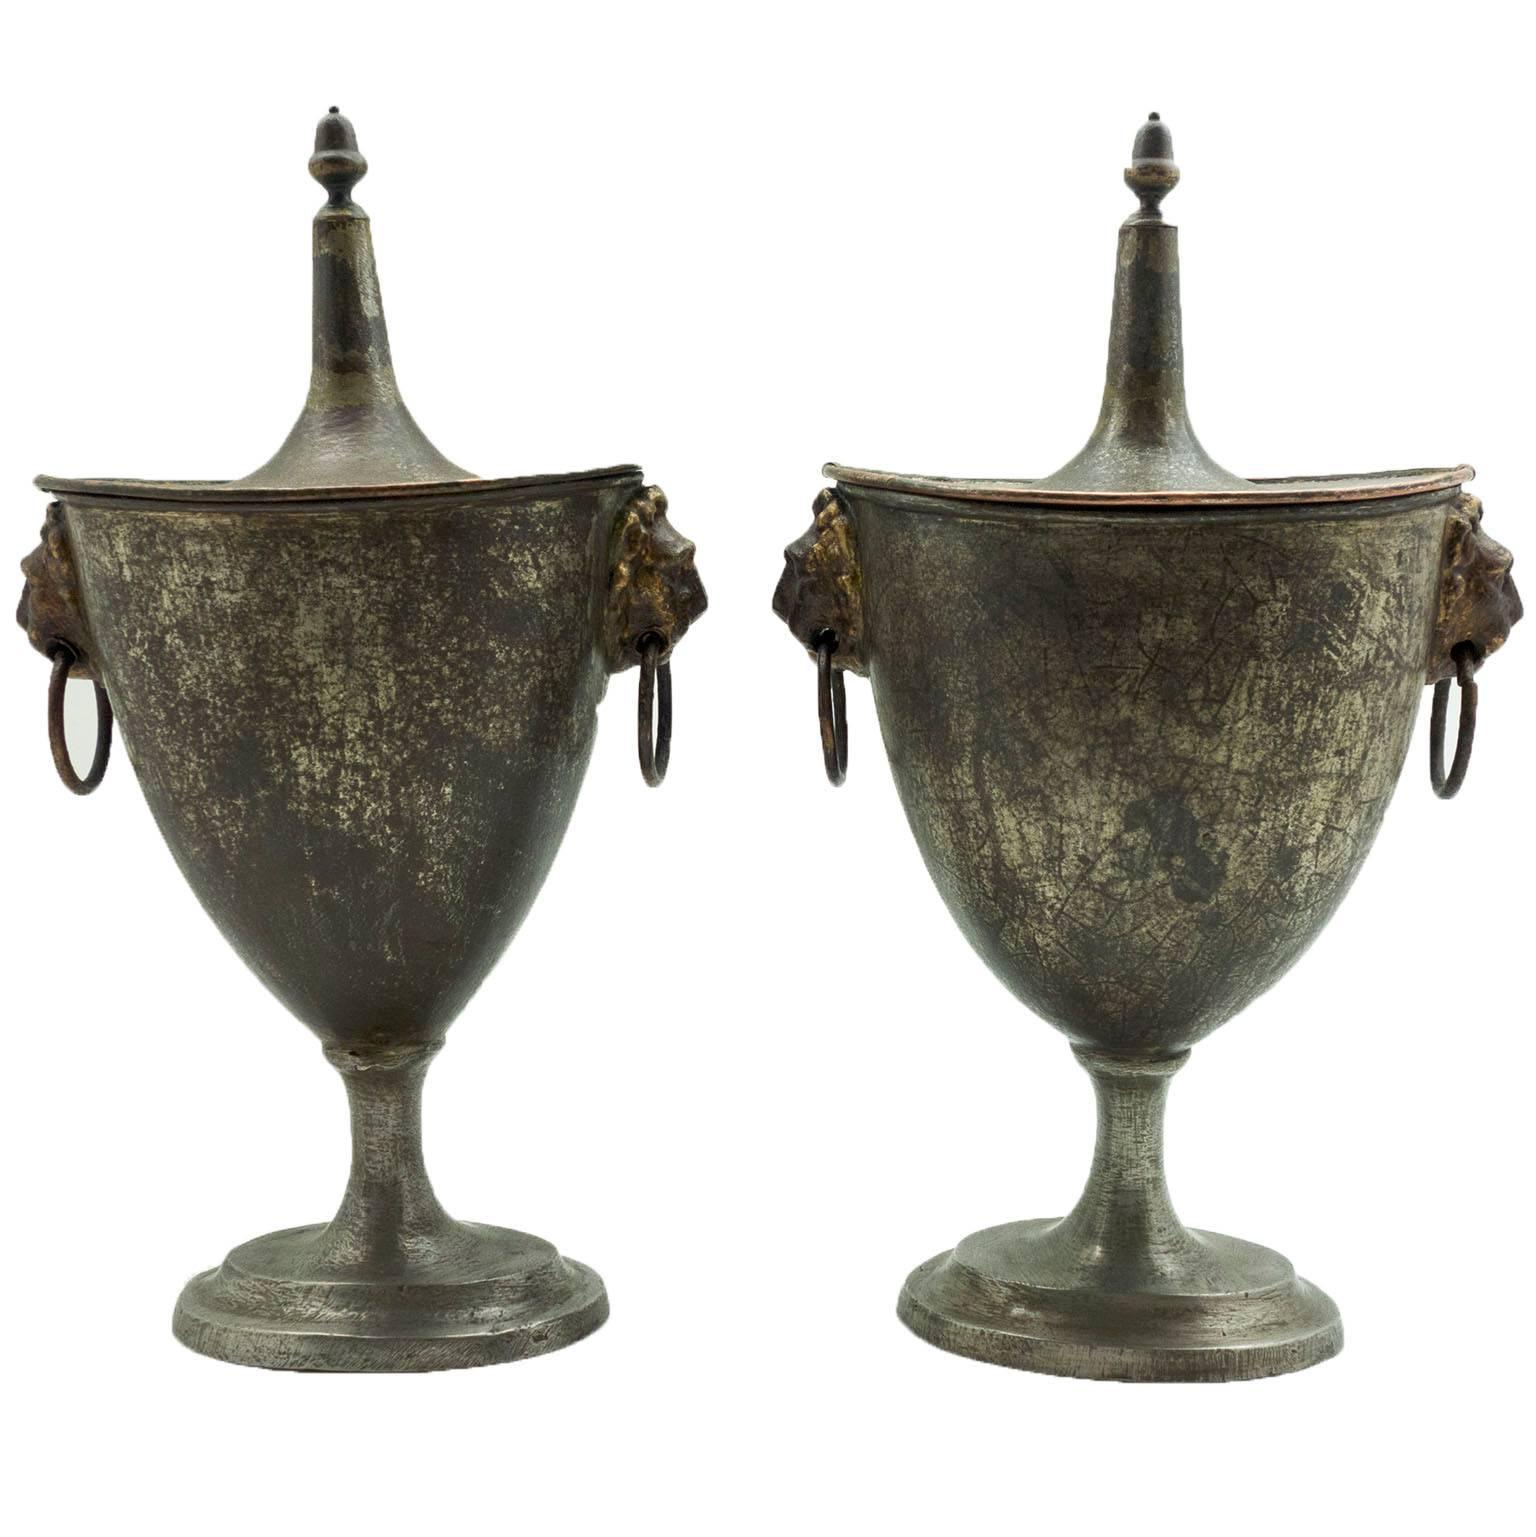 Pair of Regency Tole and Pewter Chestnut Urns with Covers For Sale